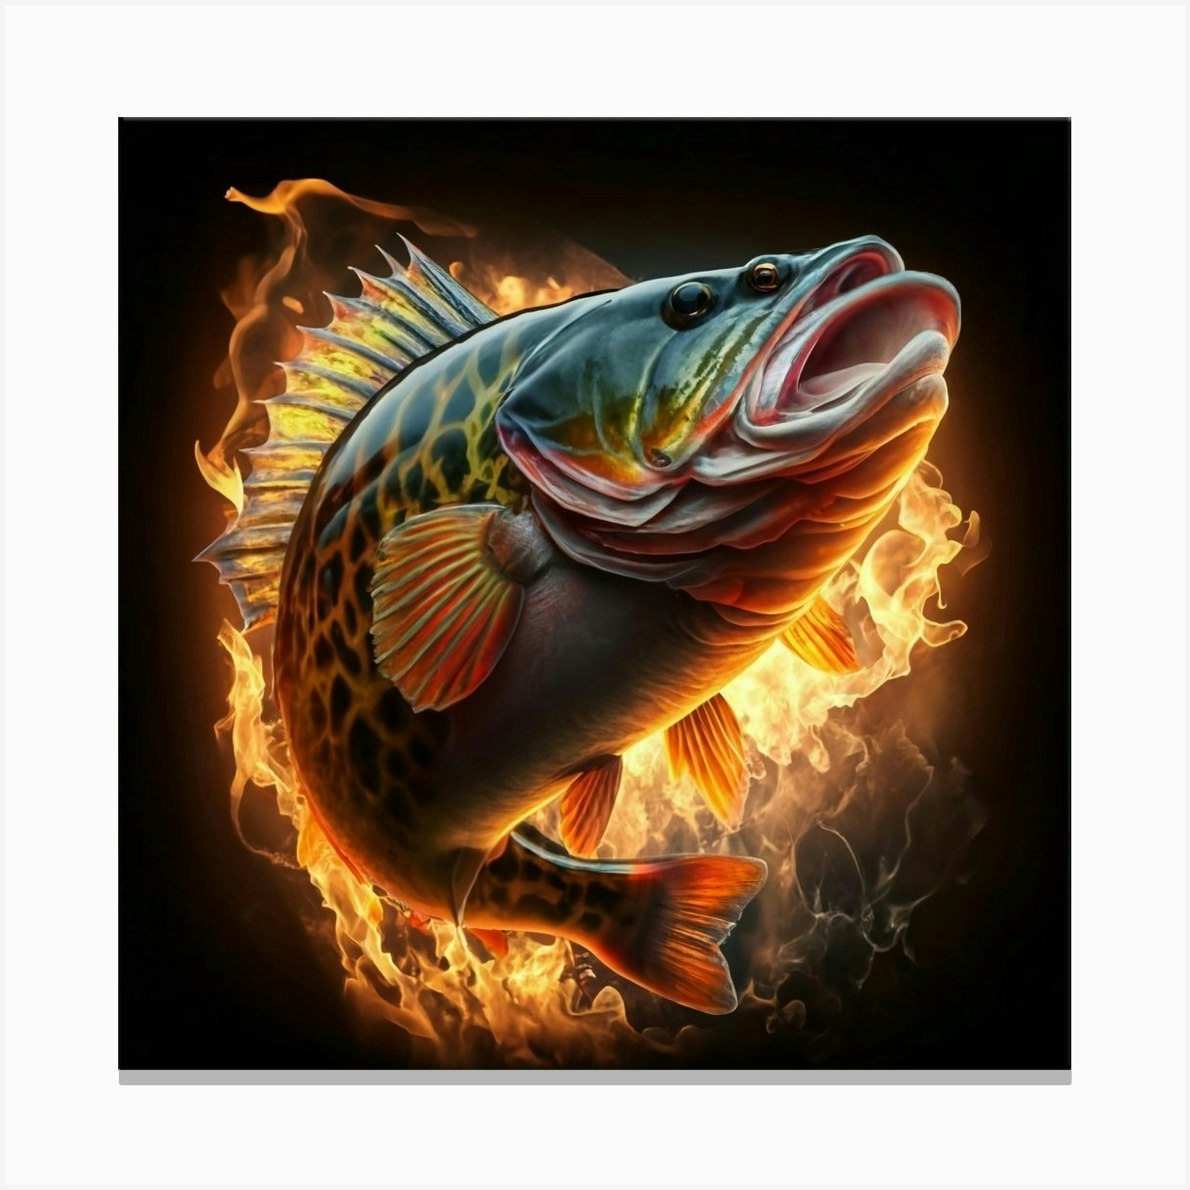 Bass Fish On Fire Canvas Print